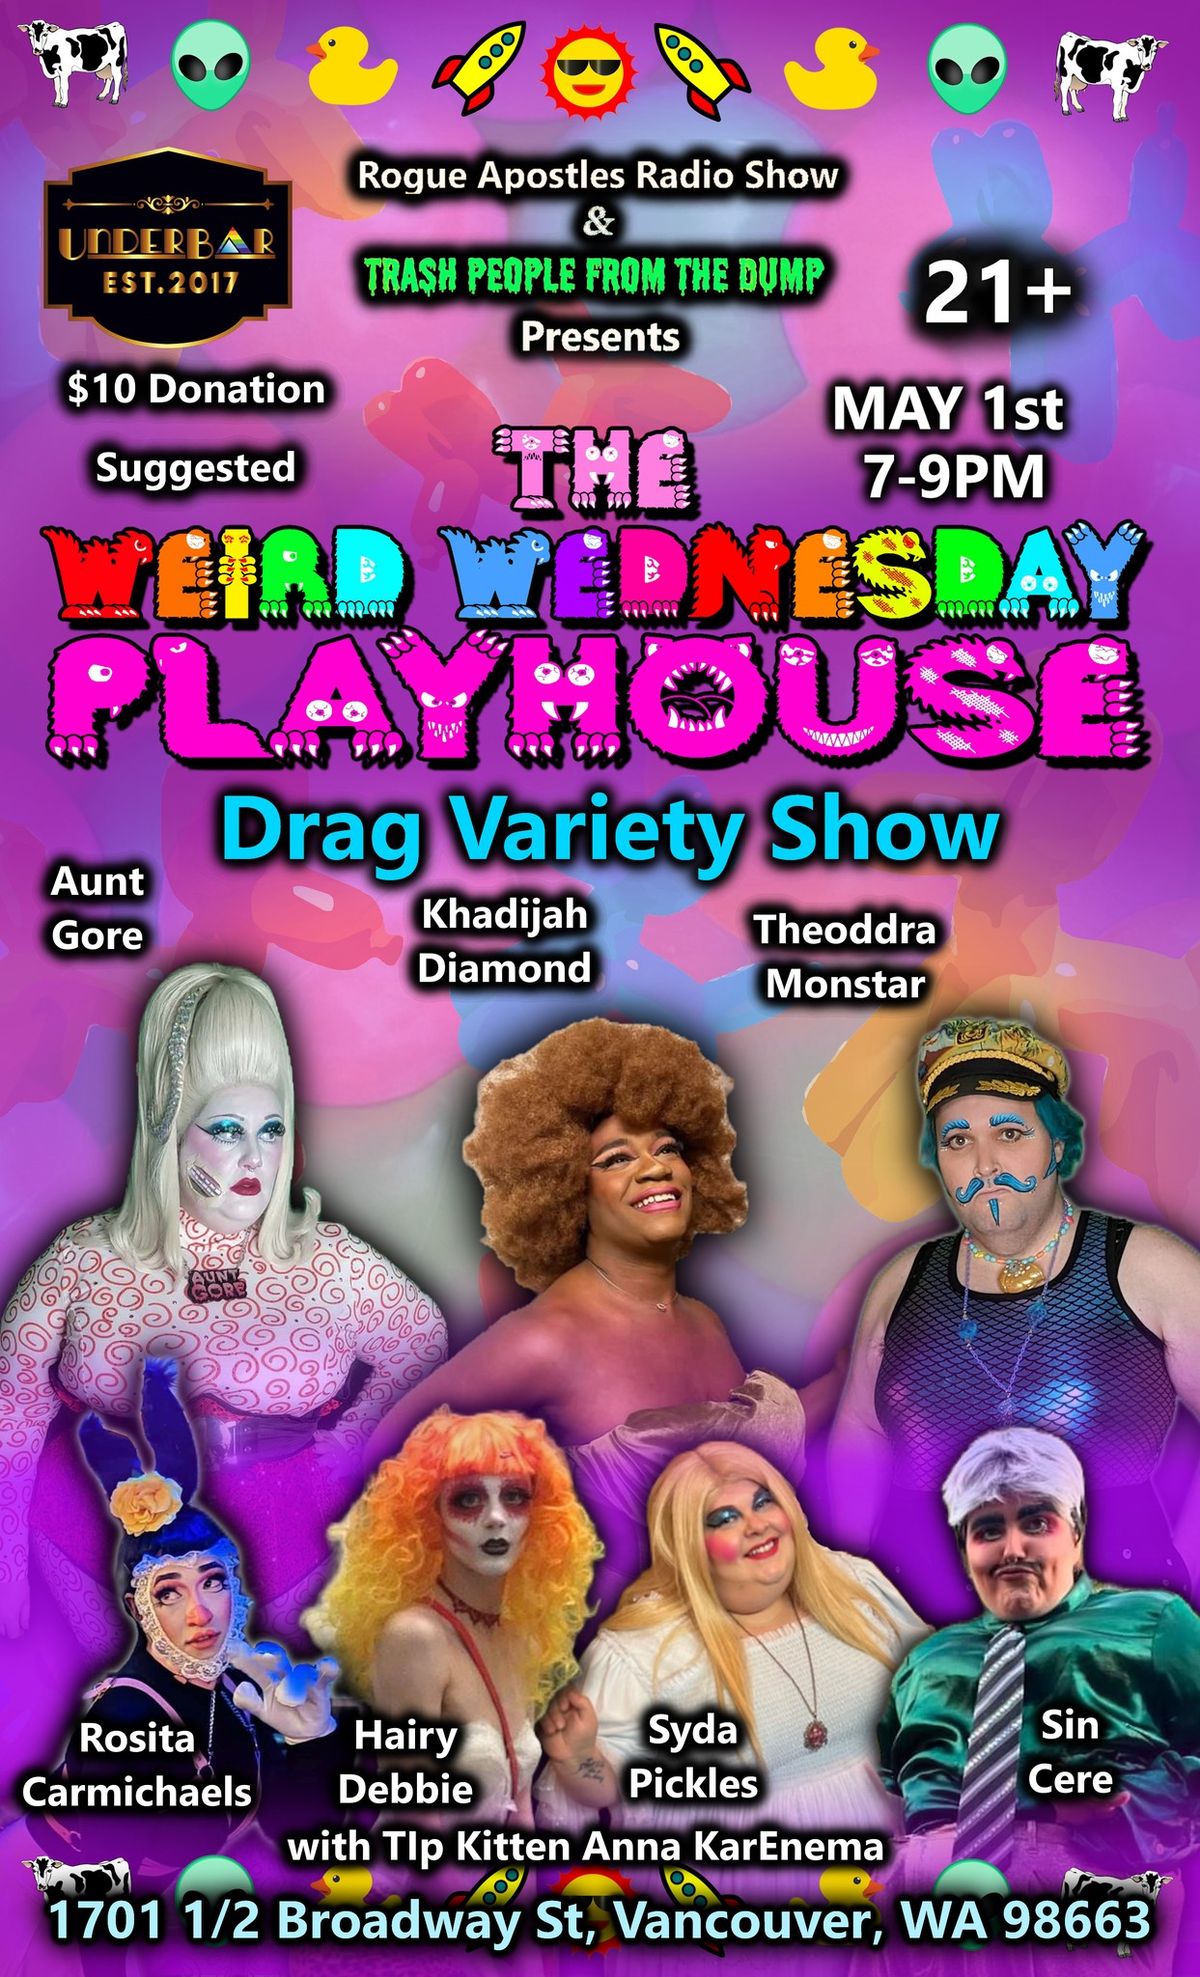 The Weird Wednesday Playhouse May 1st